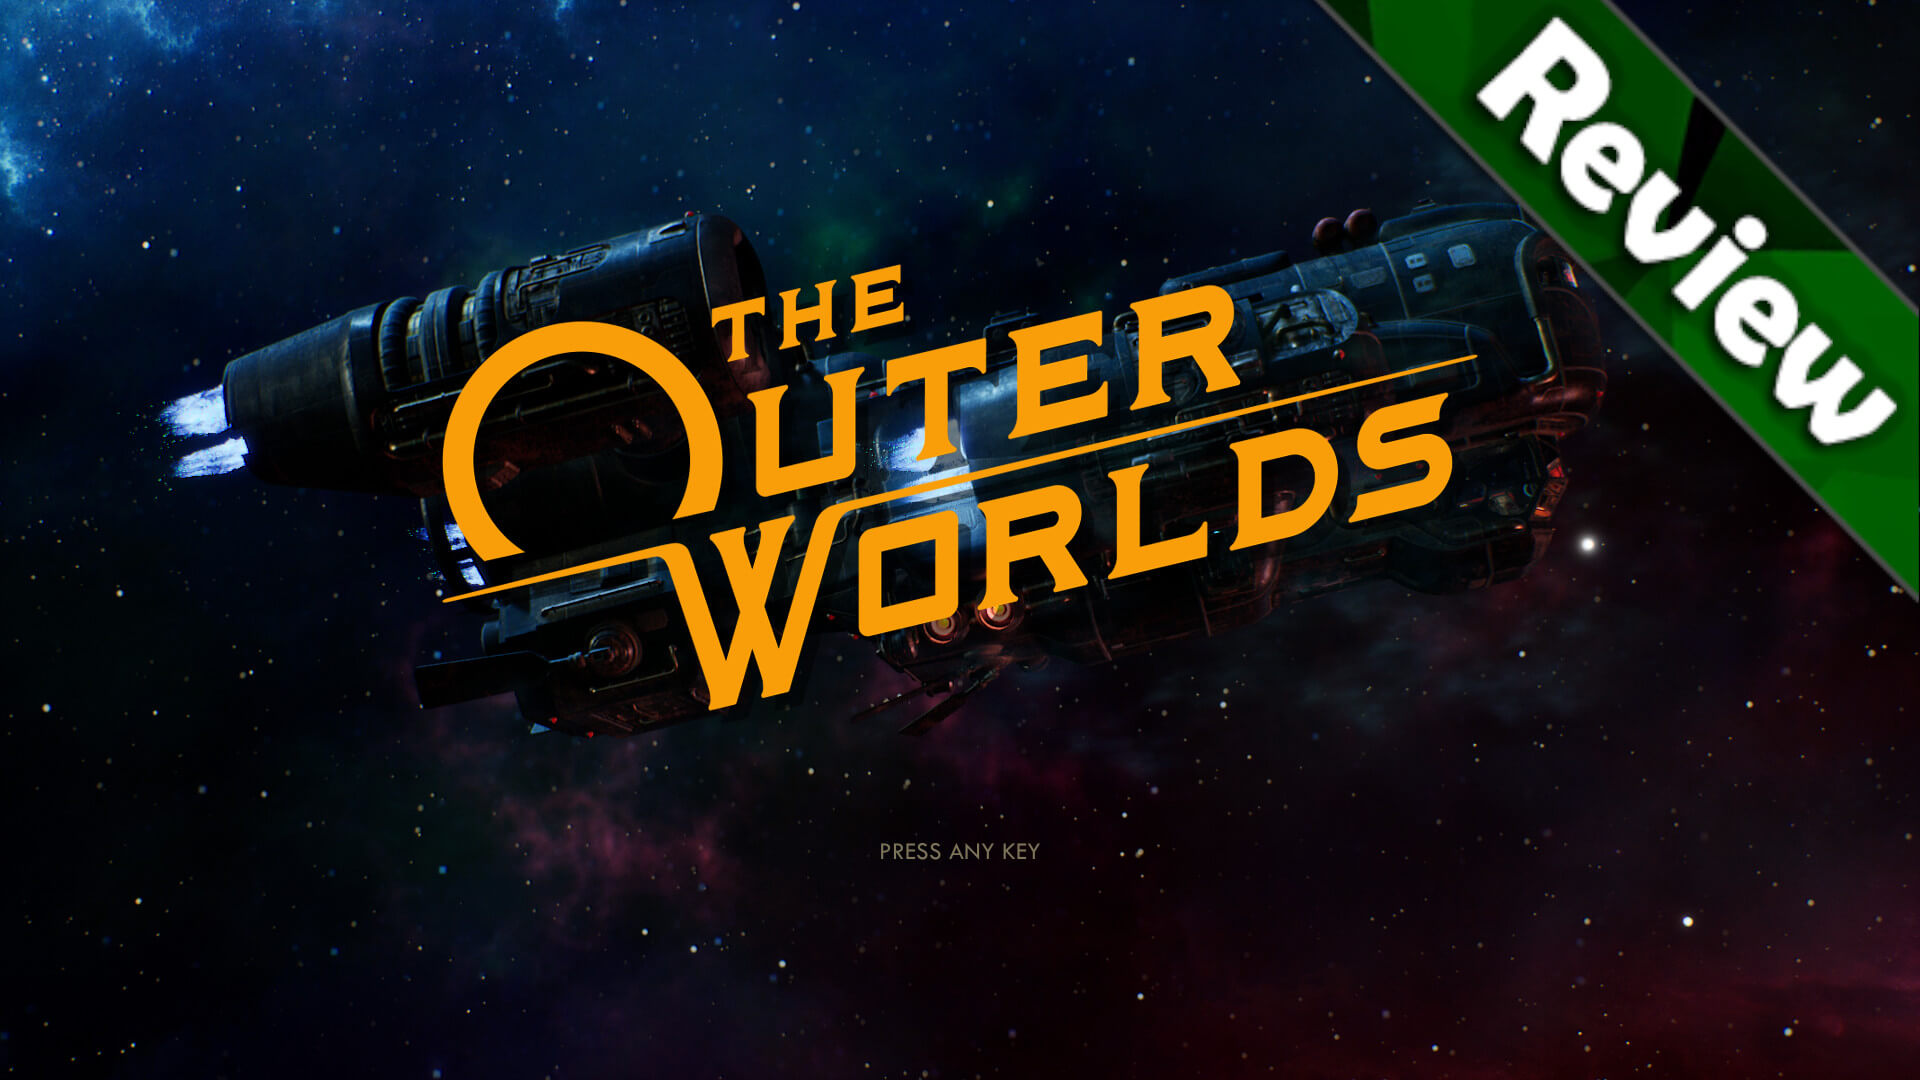 The Outer Worlds Reviews, Pros and Cons